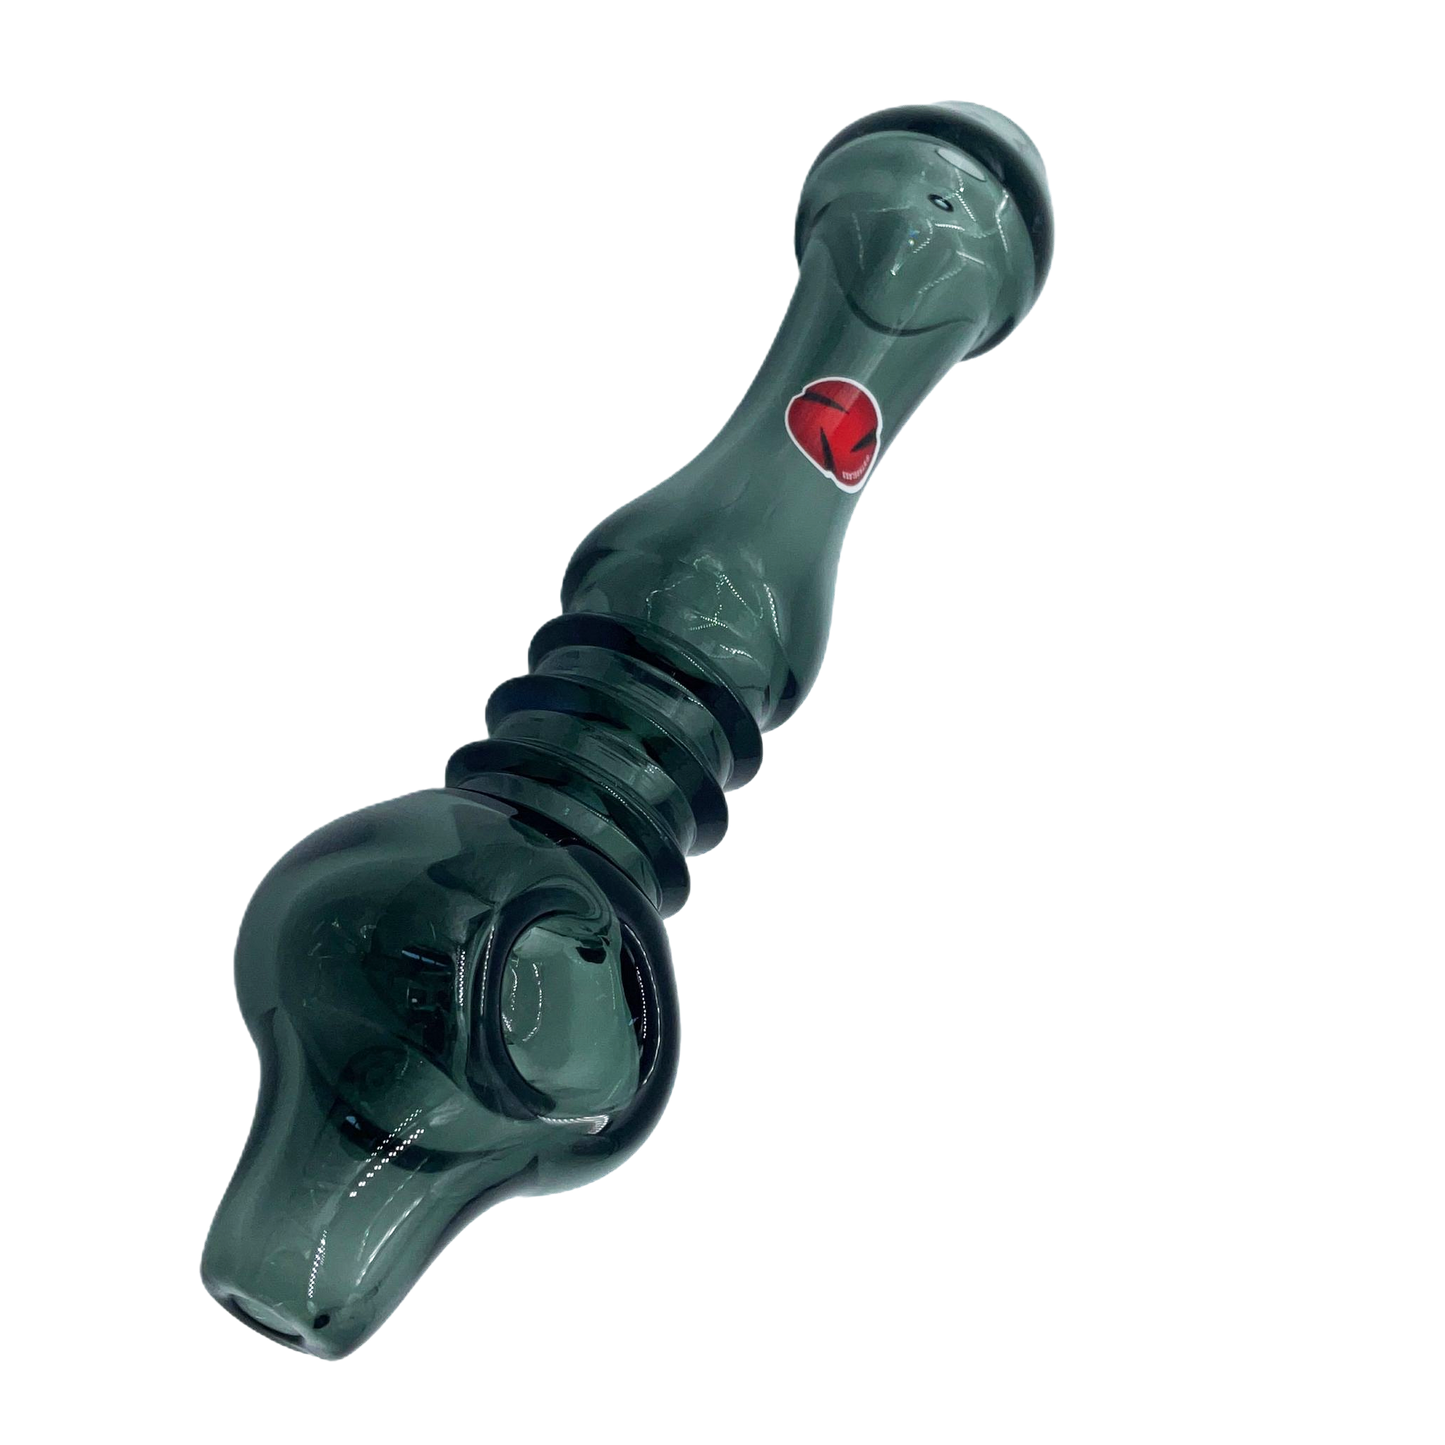 STR8 GLASS - Hand Pipe - Assorted Colors